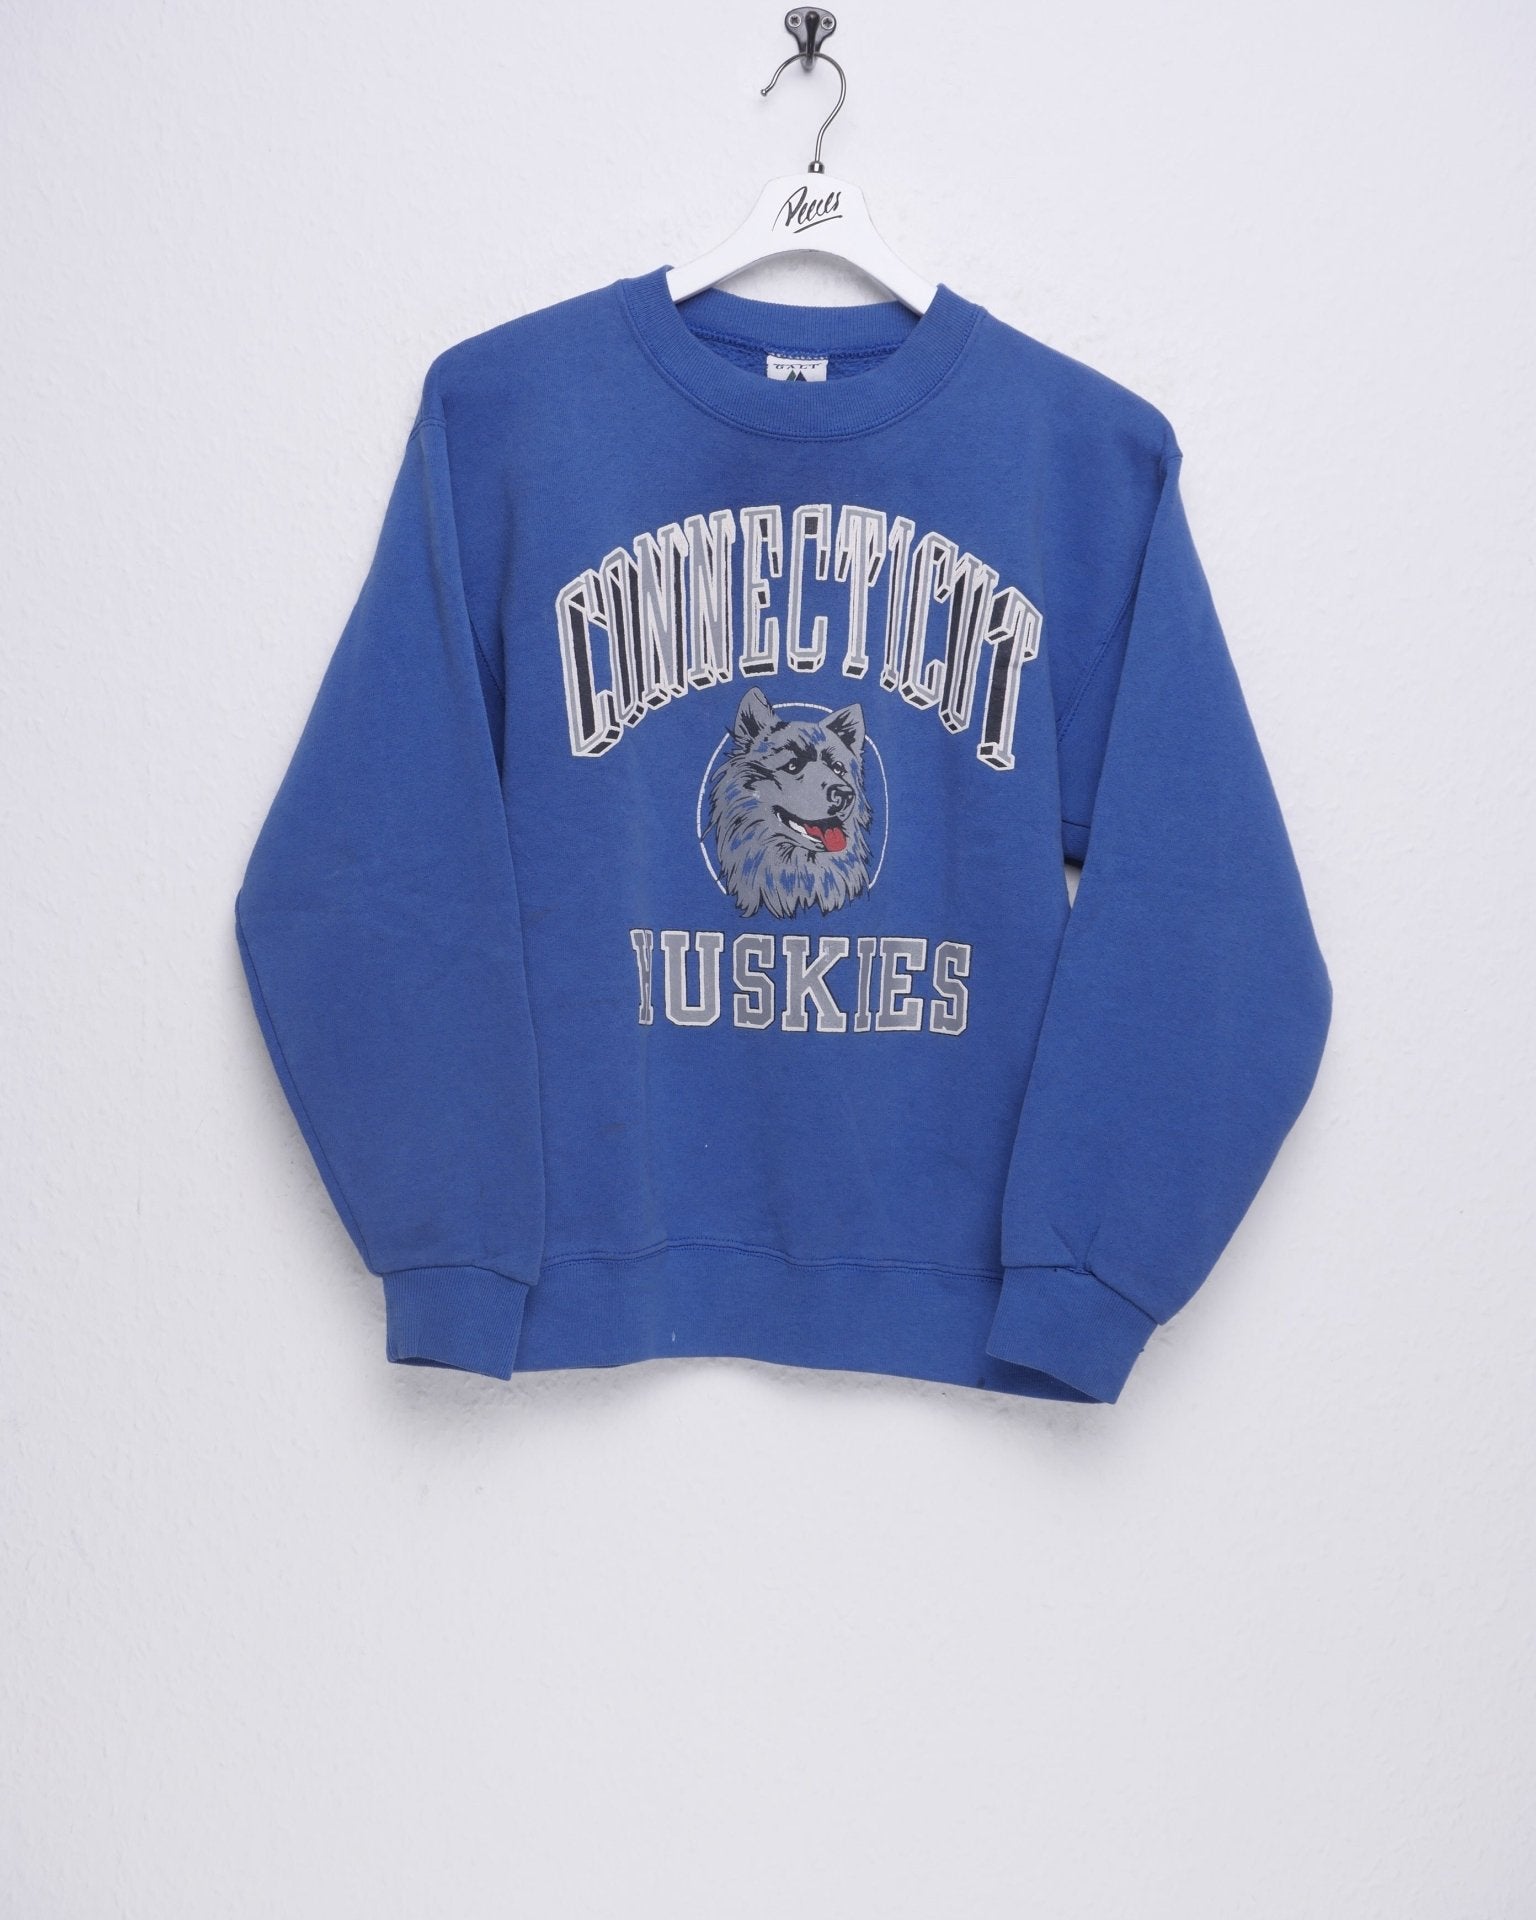 Connecticut Huskies printed Spellout Vintage Sweater - Peeces